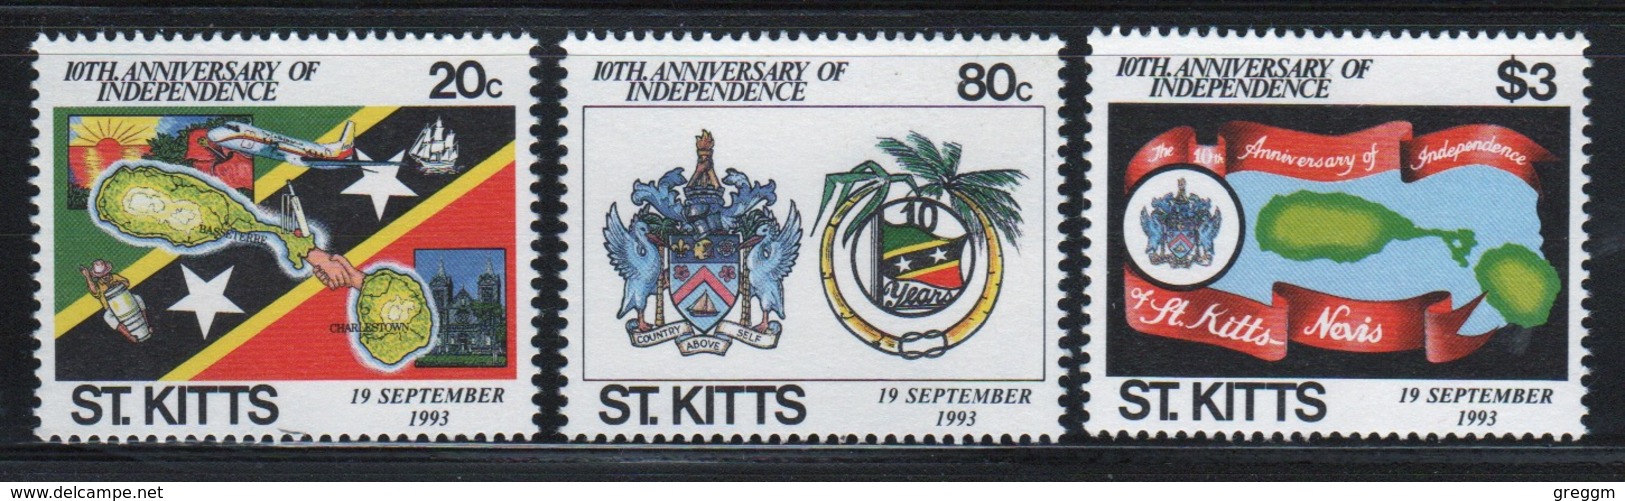 St Kitts 1993 Set Of  Stamps Celebrating The 10th Anniversary Of Independence. - St.Kitts And Nevis ( 1983-...)